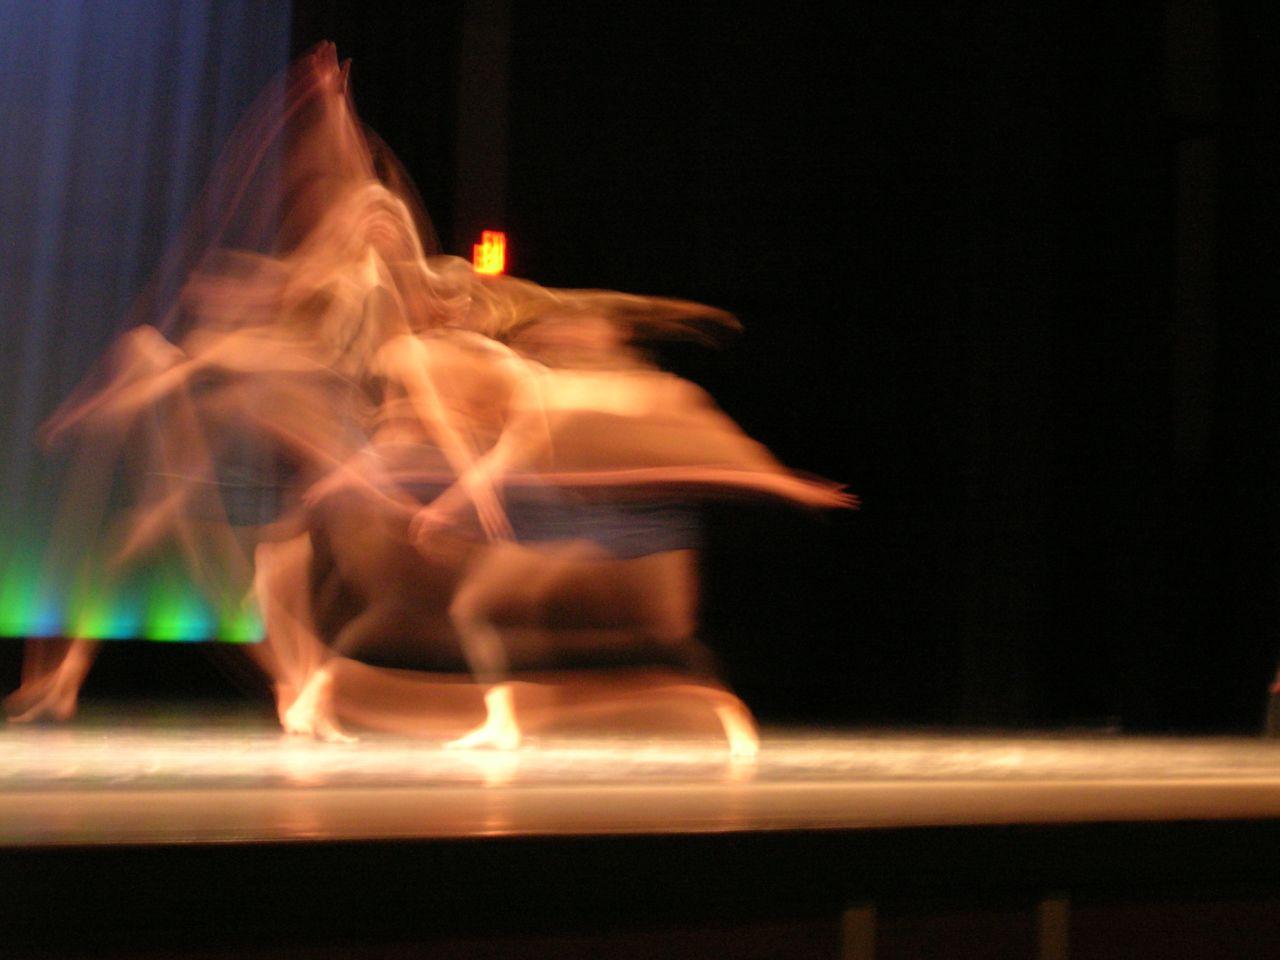 The motion blur left behind as a dancer practices on stage in a variety of poses